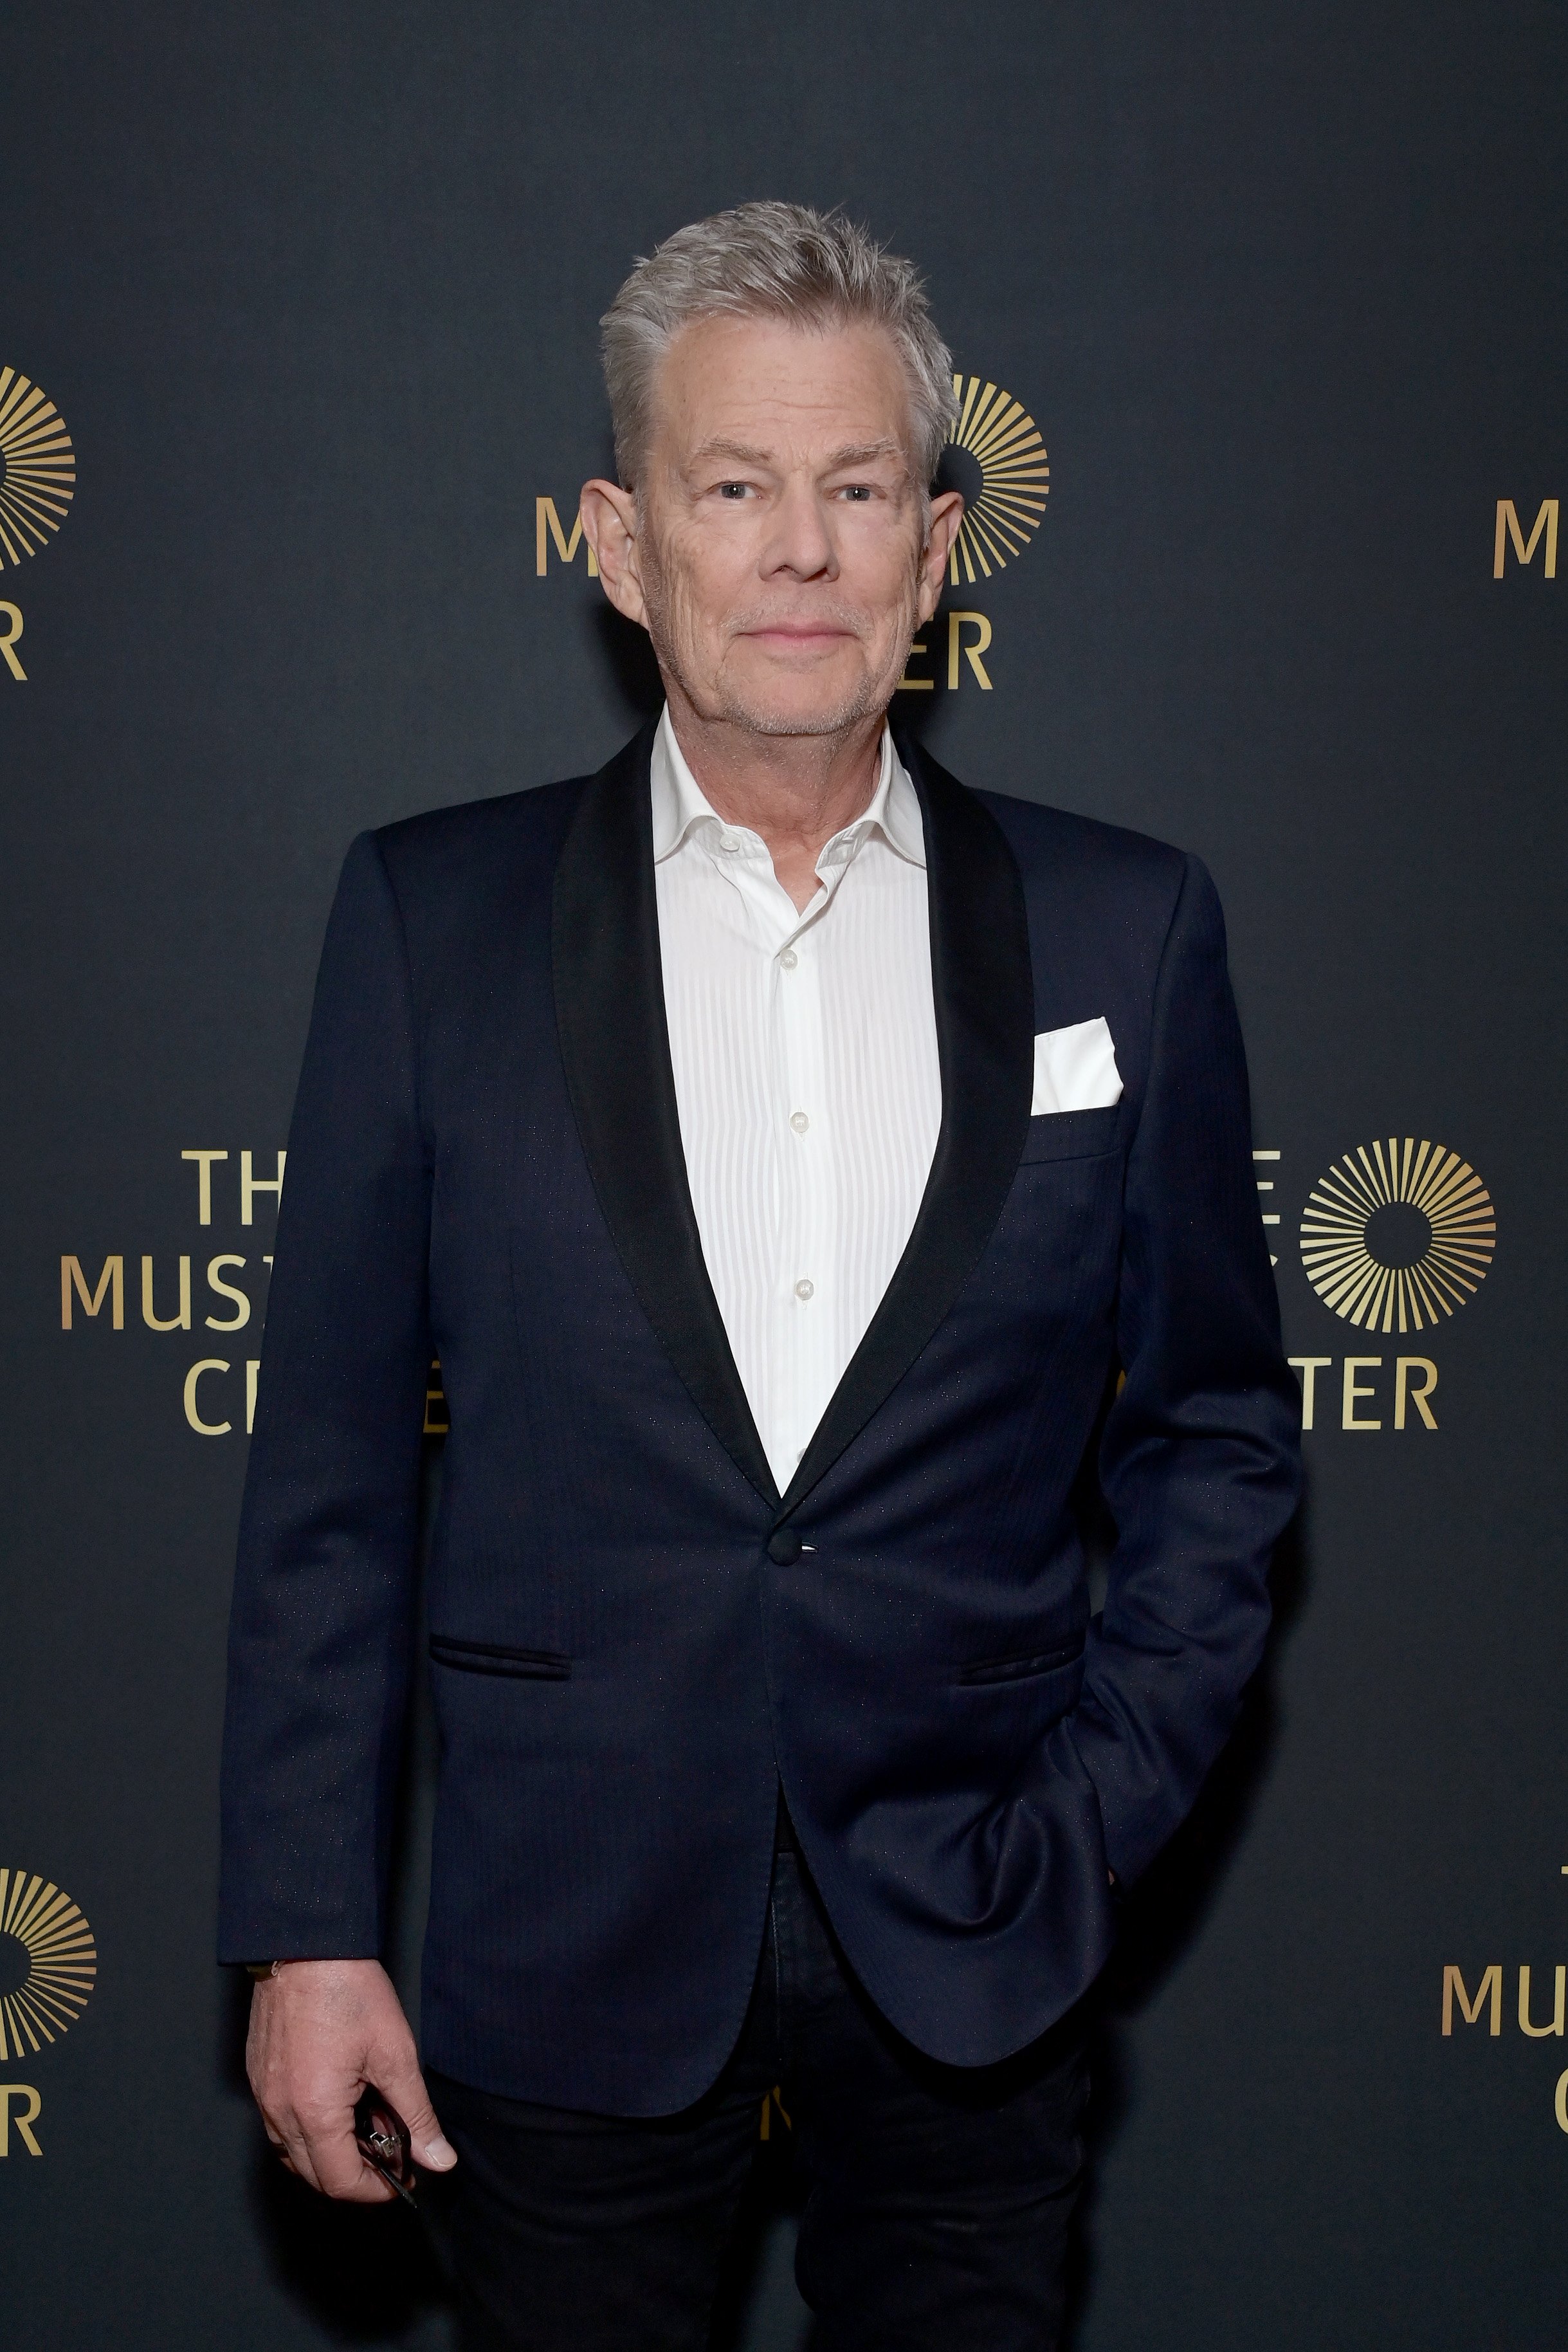 David Foster at Live at The Music Center: Concert Celebrating Jerry Moss on January 14, 2023, in Los Angeles, California | Source: Getty Images